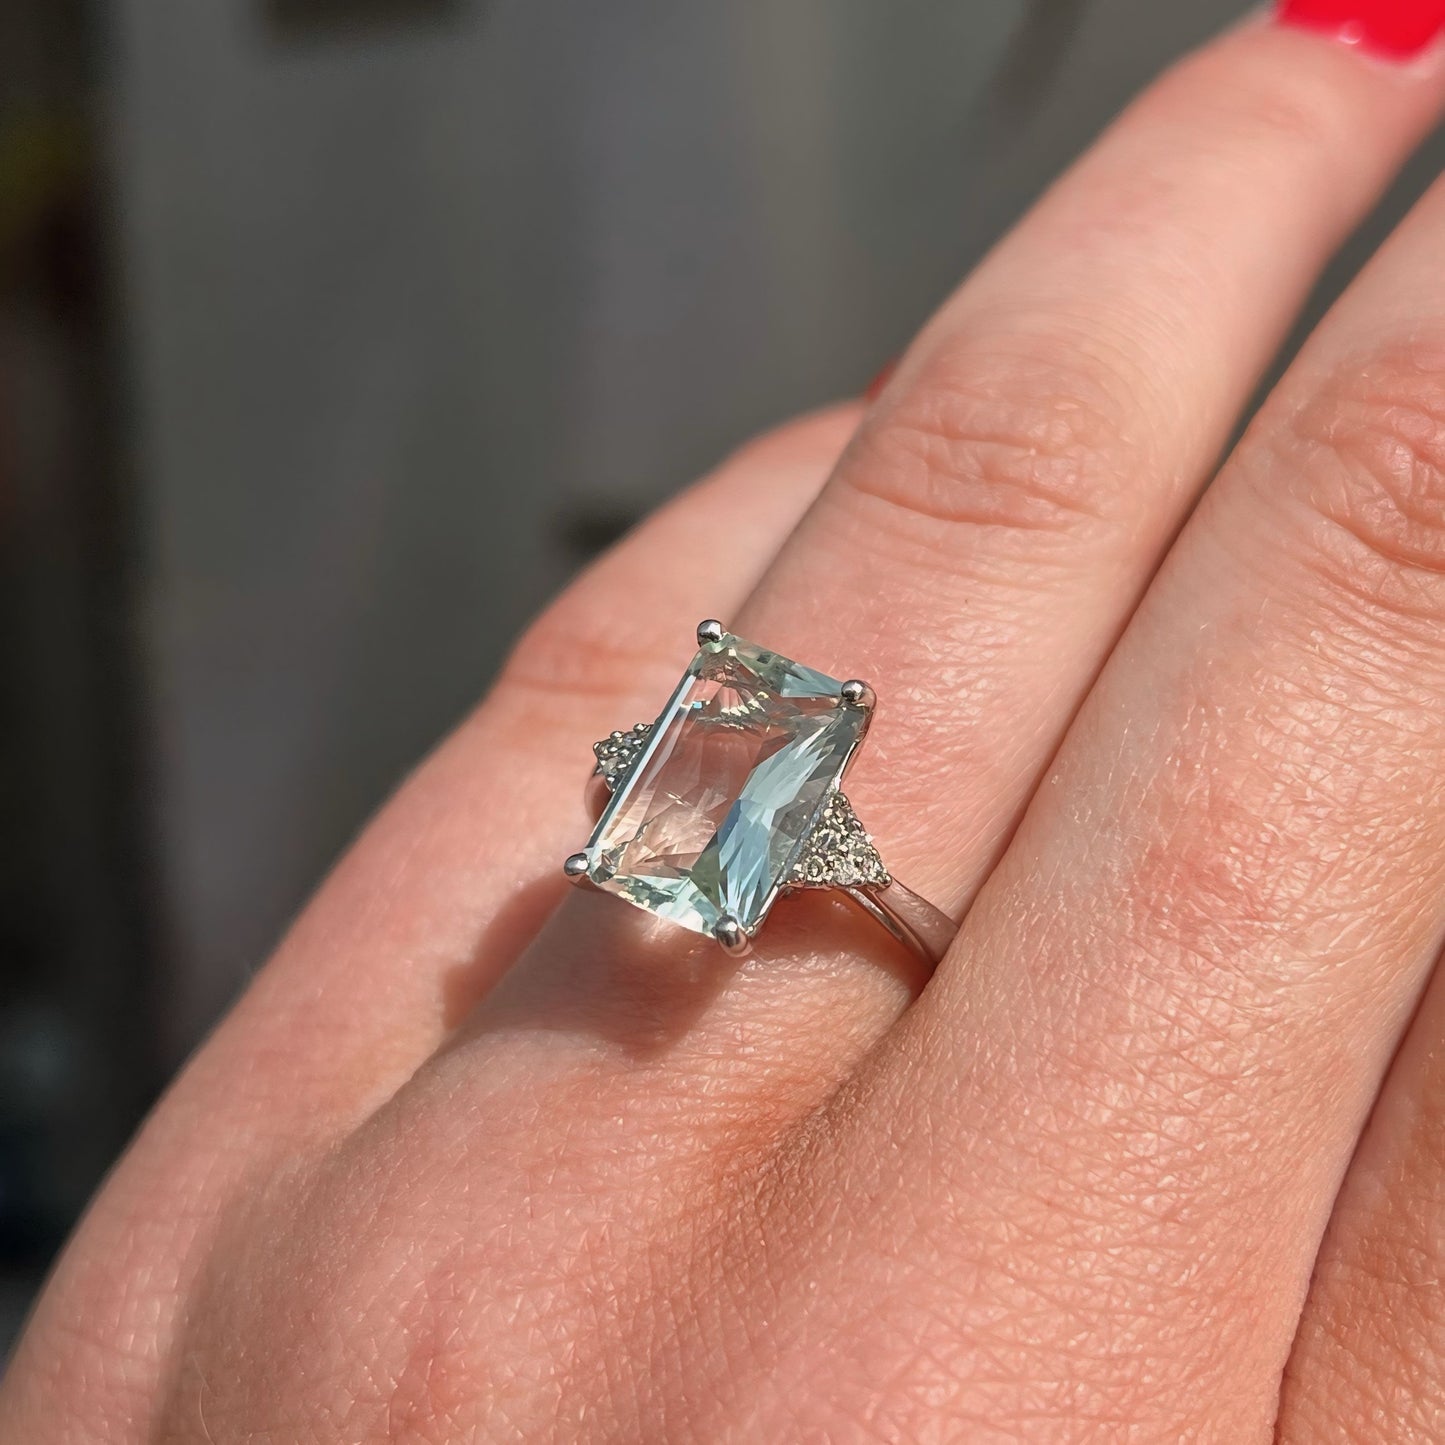 Vintage 9ct White Gold Green Amethyst and Diamond Cocktail Ring - Size M